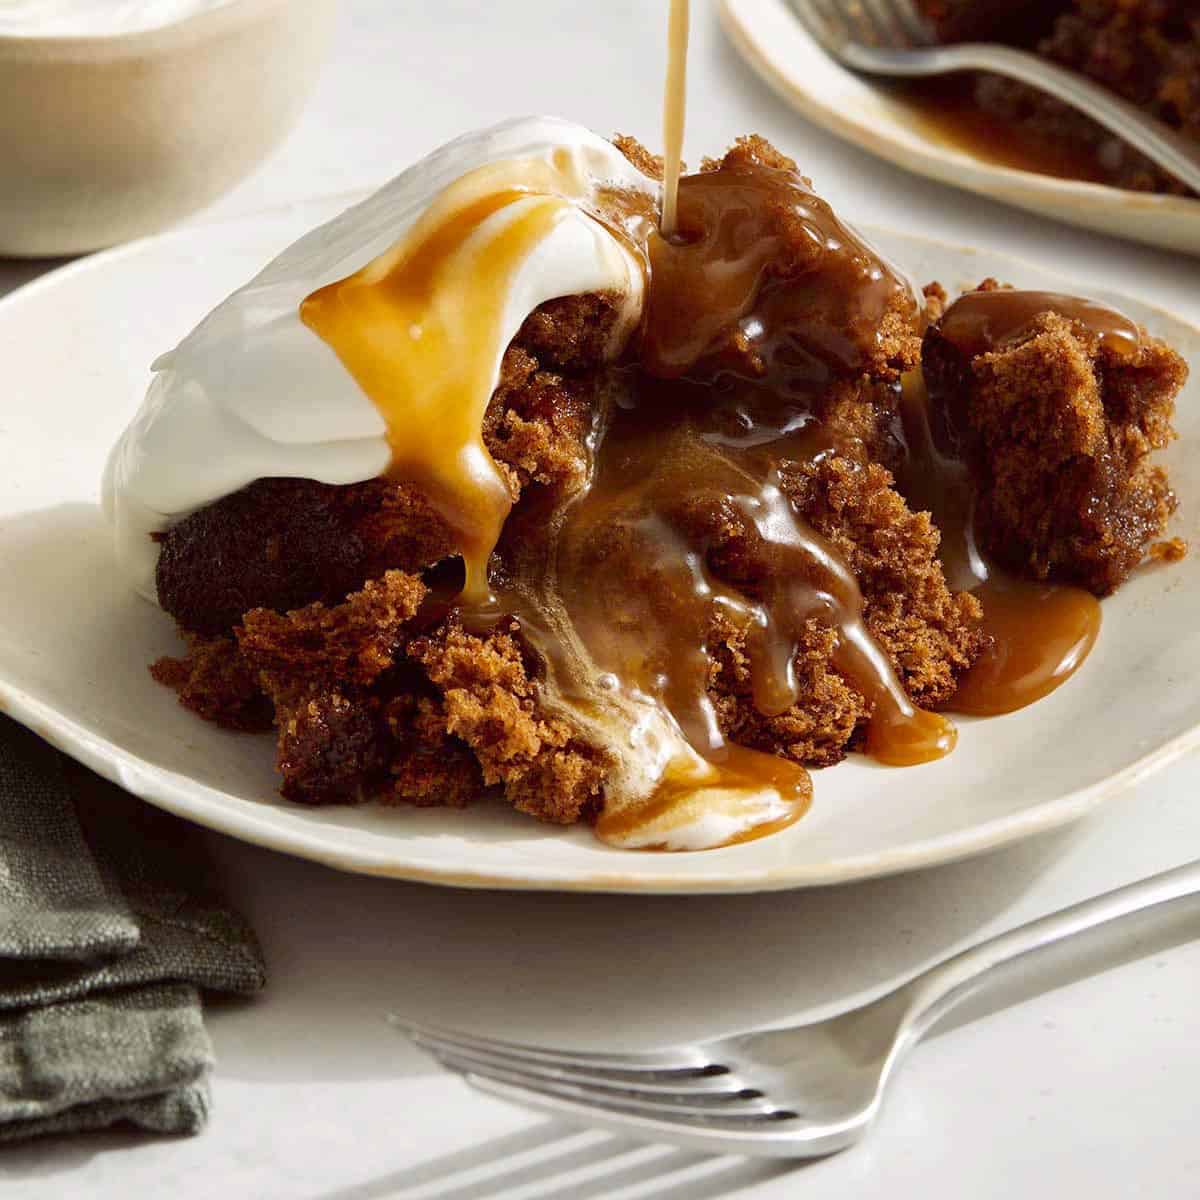 https://www.spoonforkbacon.com/wp-content/uploads/2020/12/sticky-toffee-pudding-rc-2.jpg